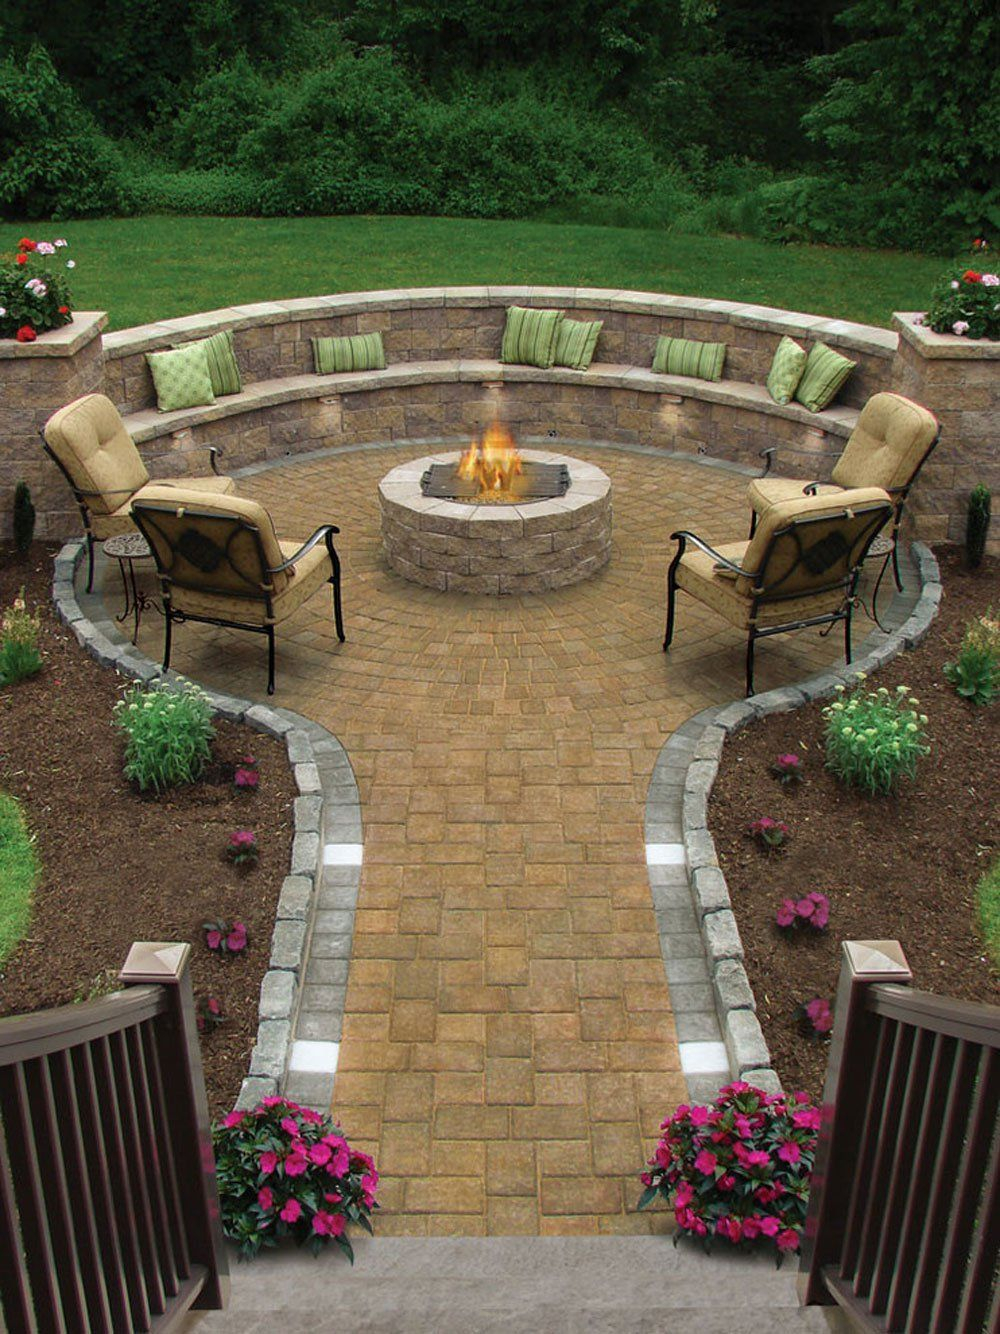 17 Of The Most Amazing Seating Area Around The Fire Pit Ever in sizing 1000 X 1334